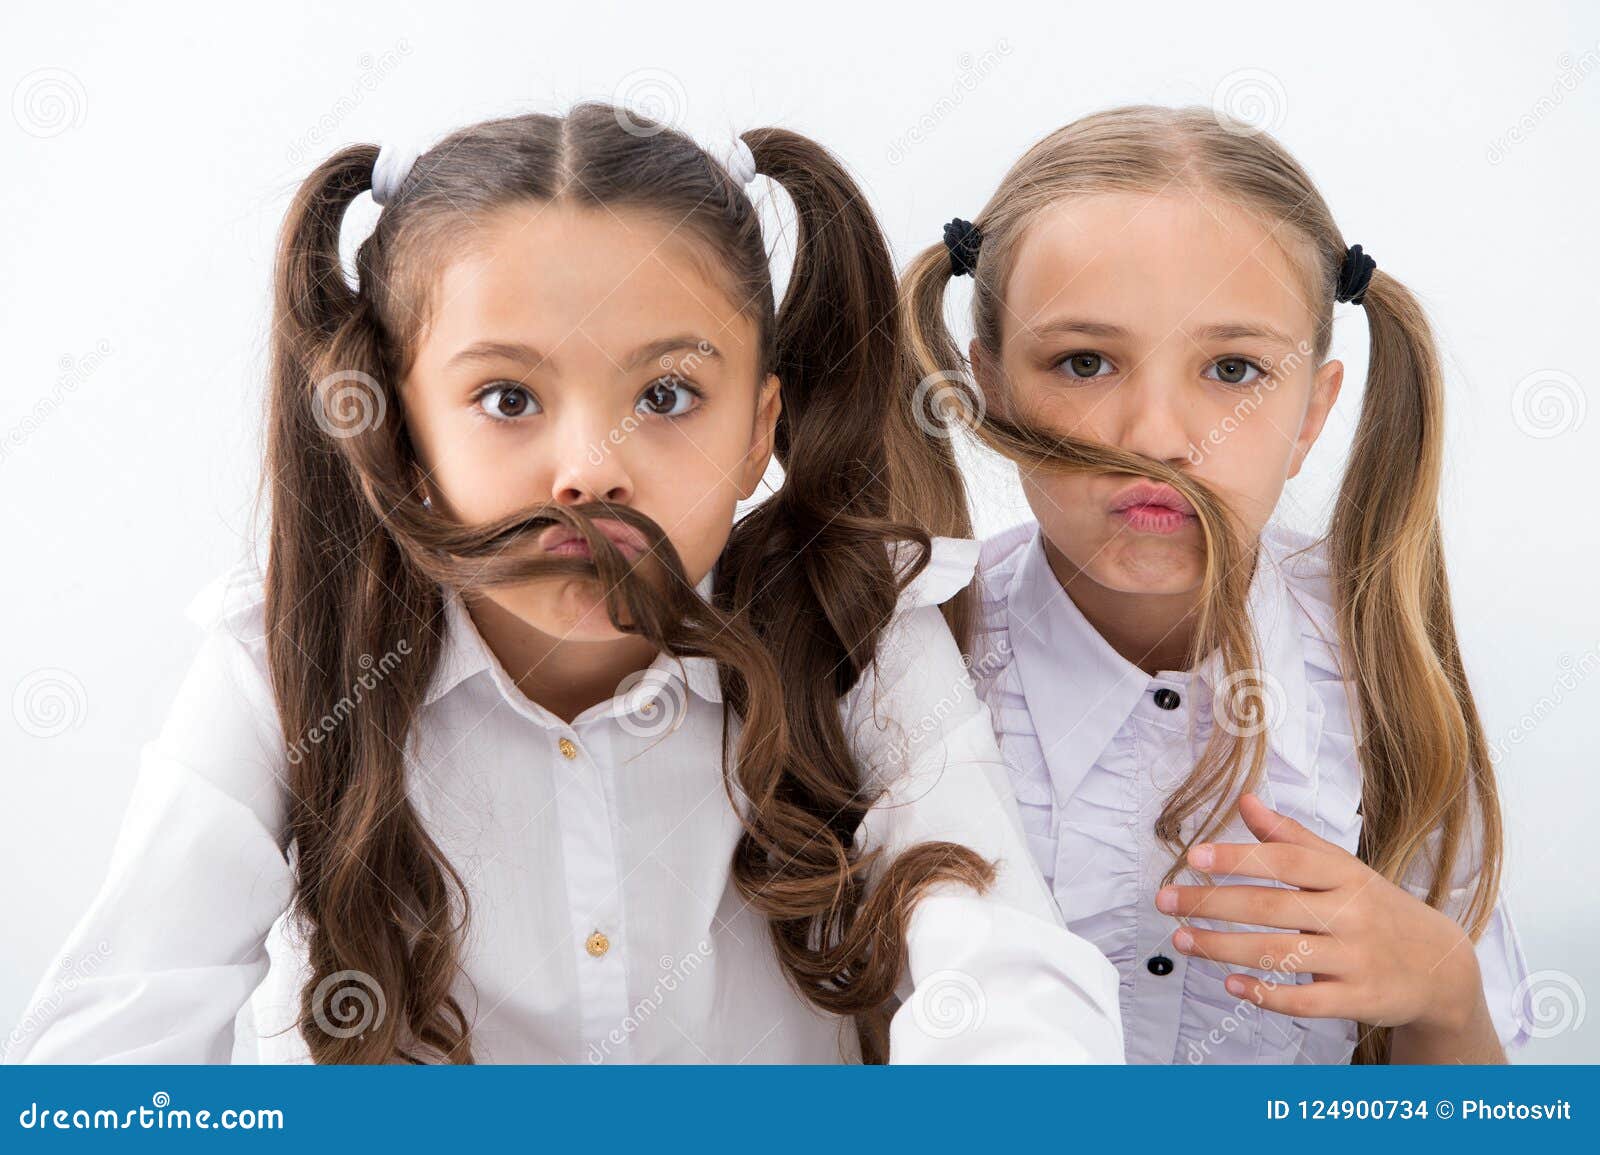 Little Girls Make Mustache With Long Hair Hairstyle Concept